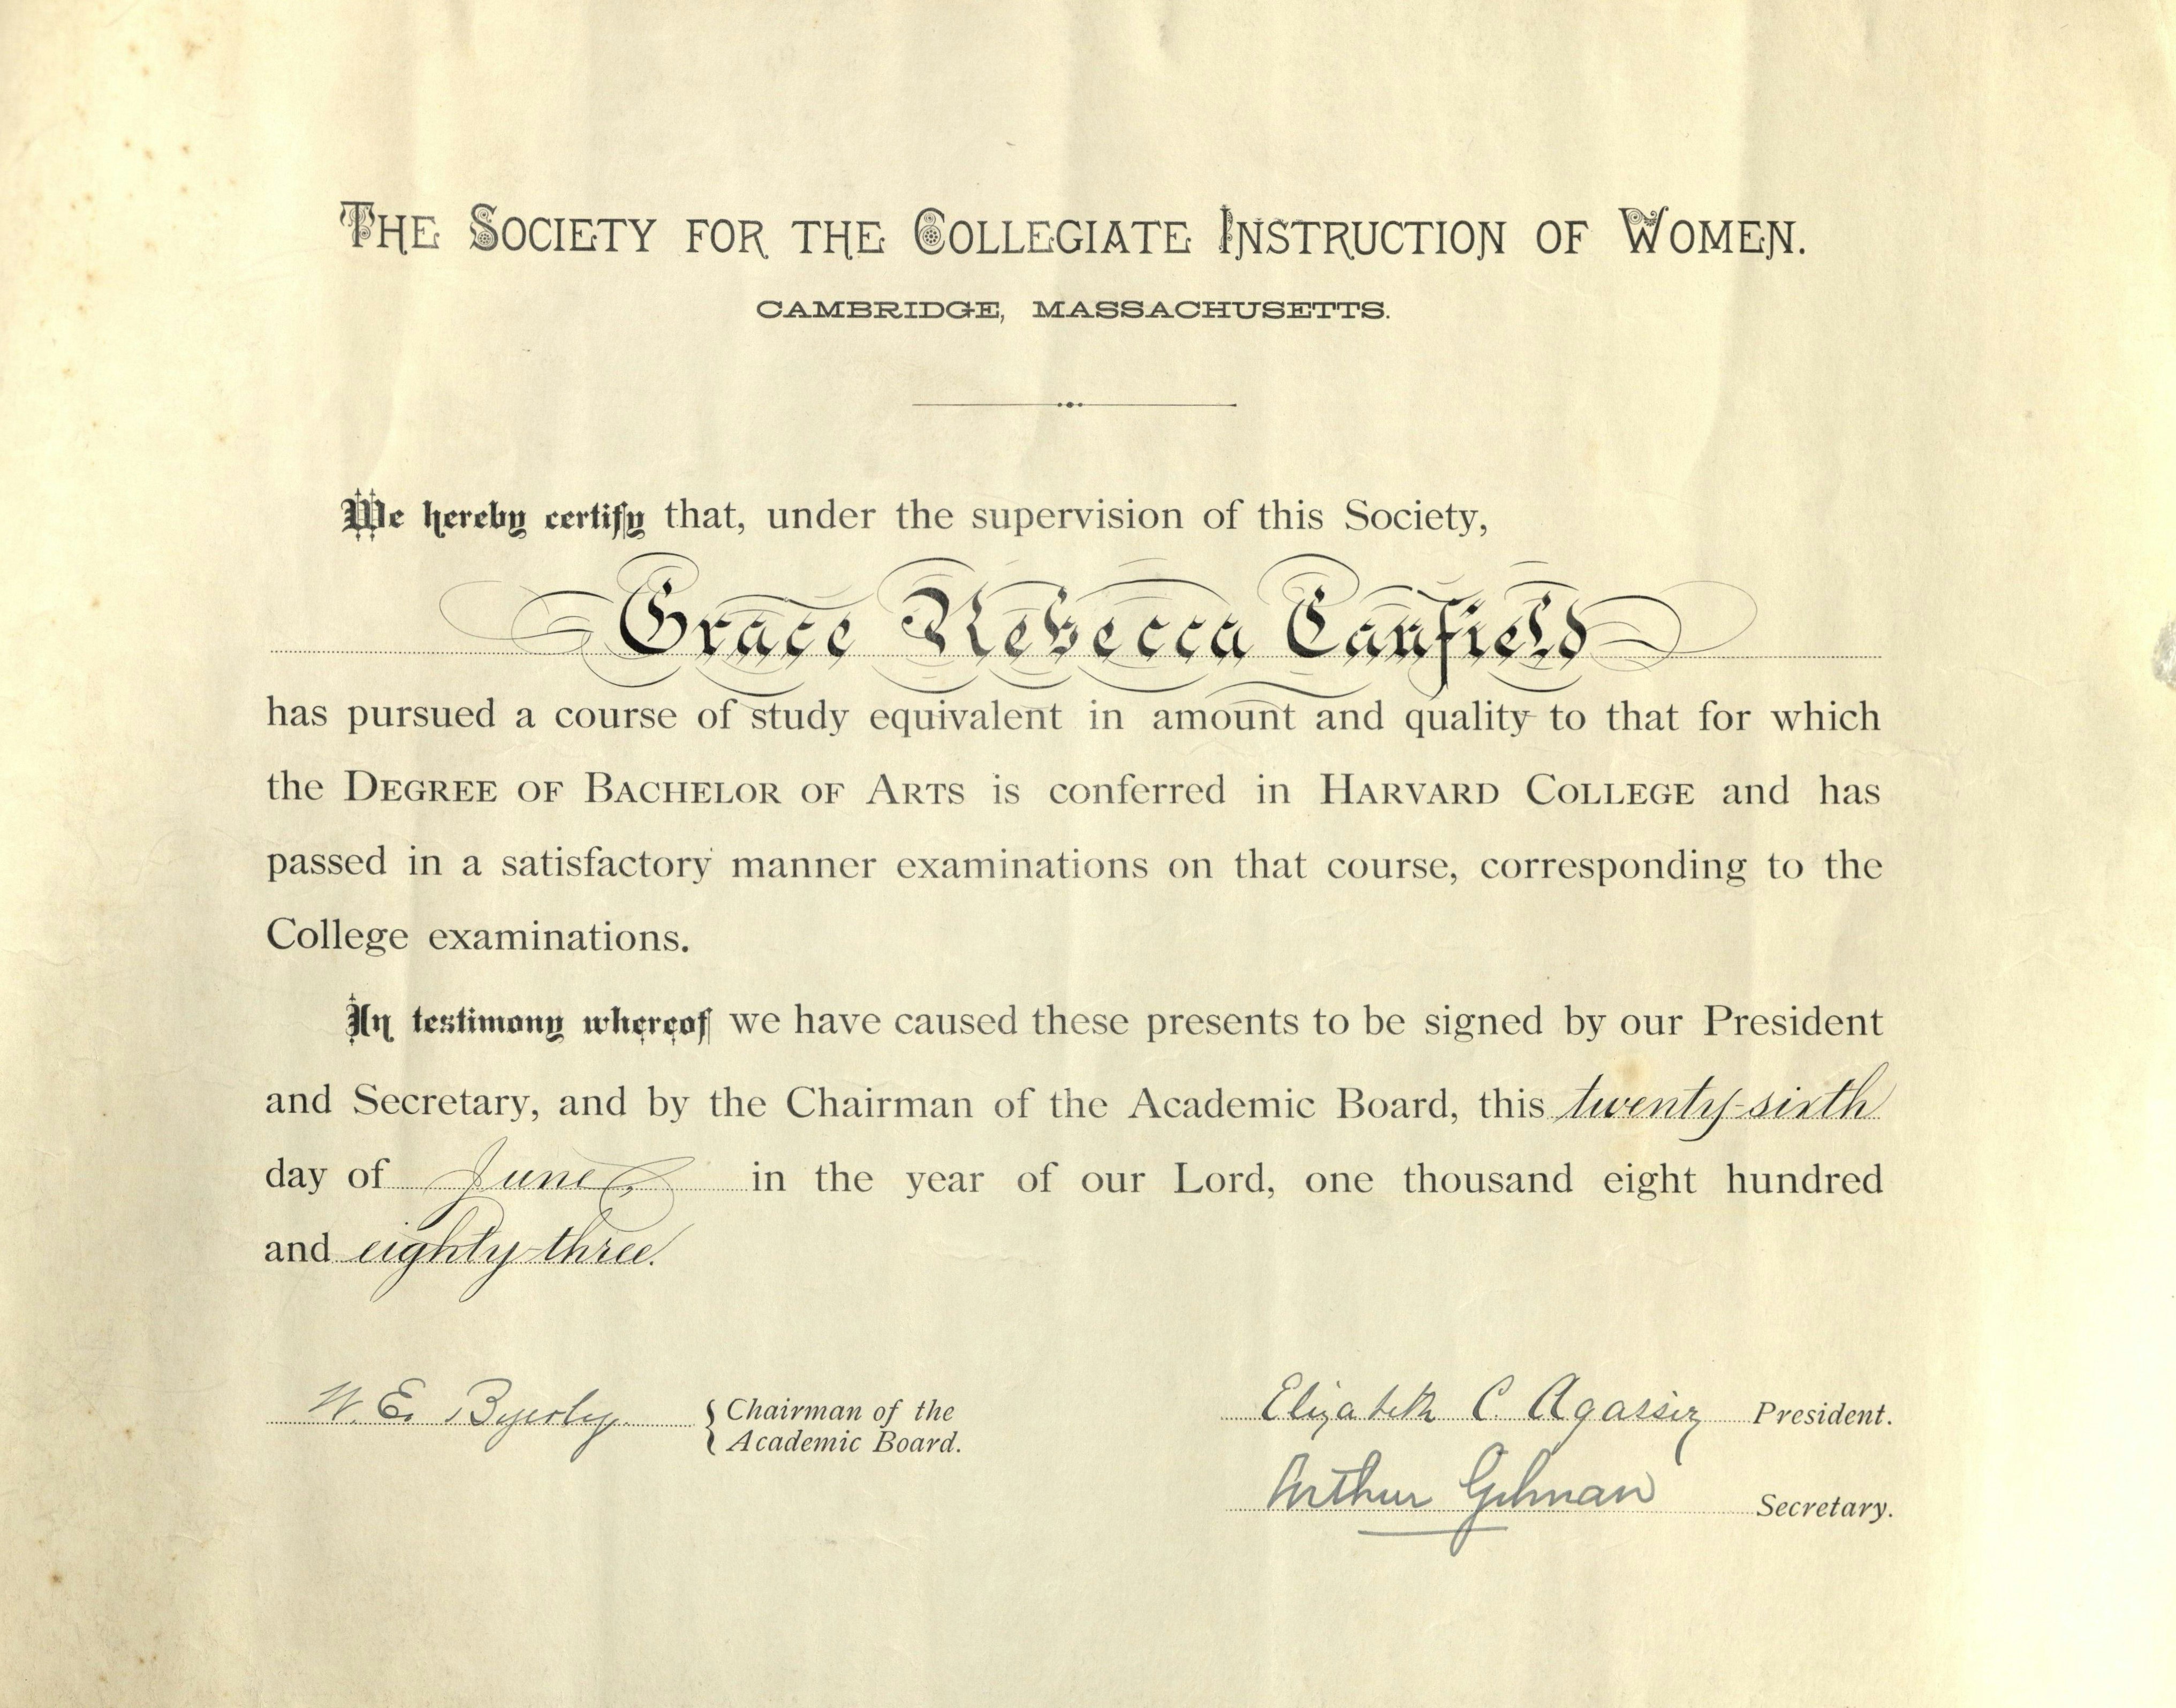 Society for the Collegiate Instruction of Women certificate